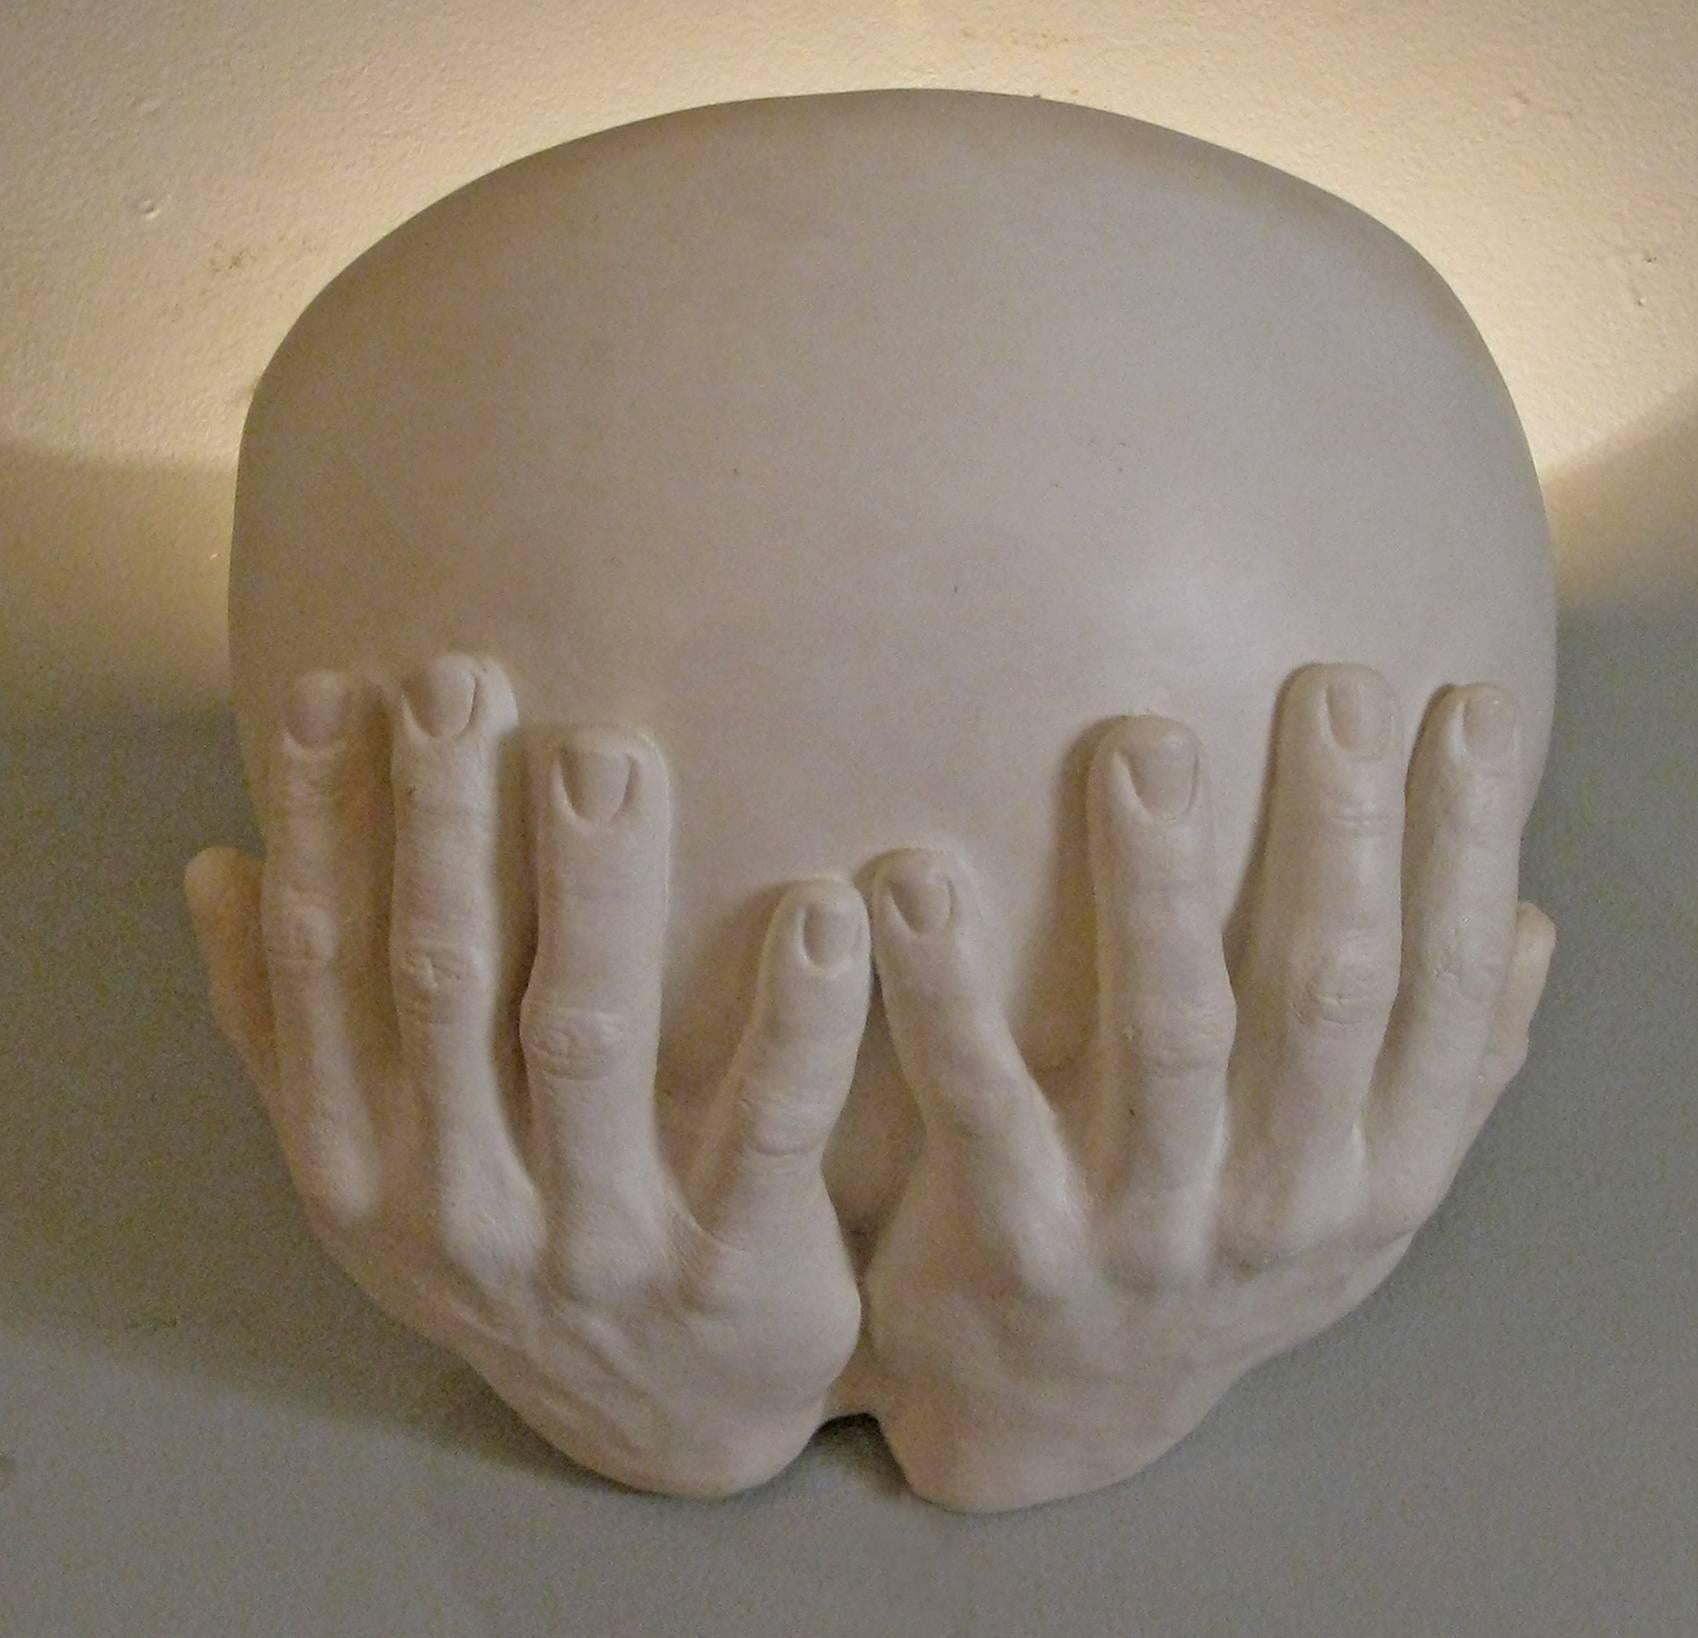 A pair of beautiful plaster sconces made by artist Richard Etts, from his iconic 'Hands' series. Each has a pair hands holding a half bowl with a single light socket in each. Both are signed and dated 'Richard Etts 1976'.